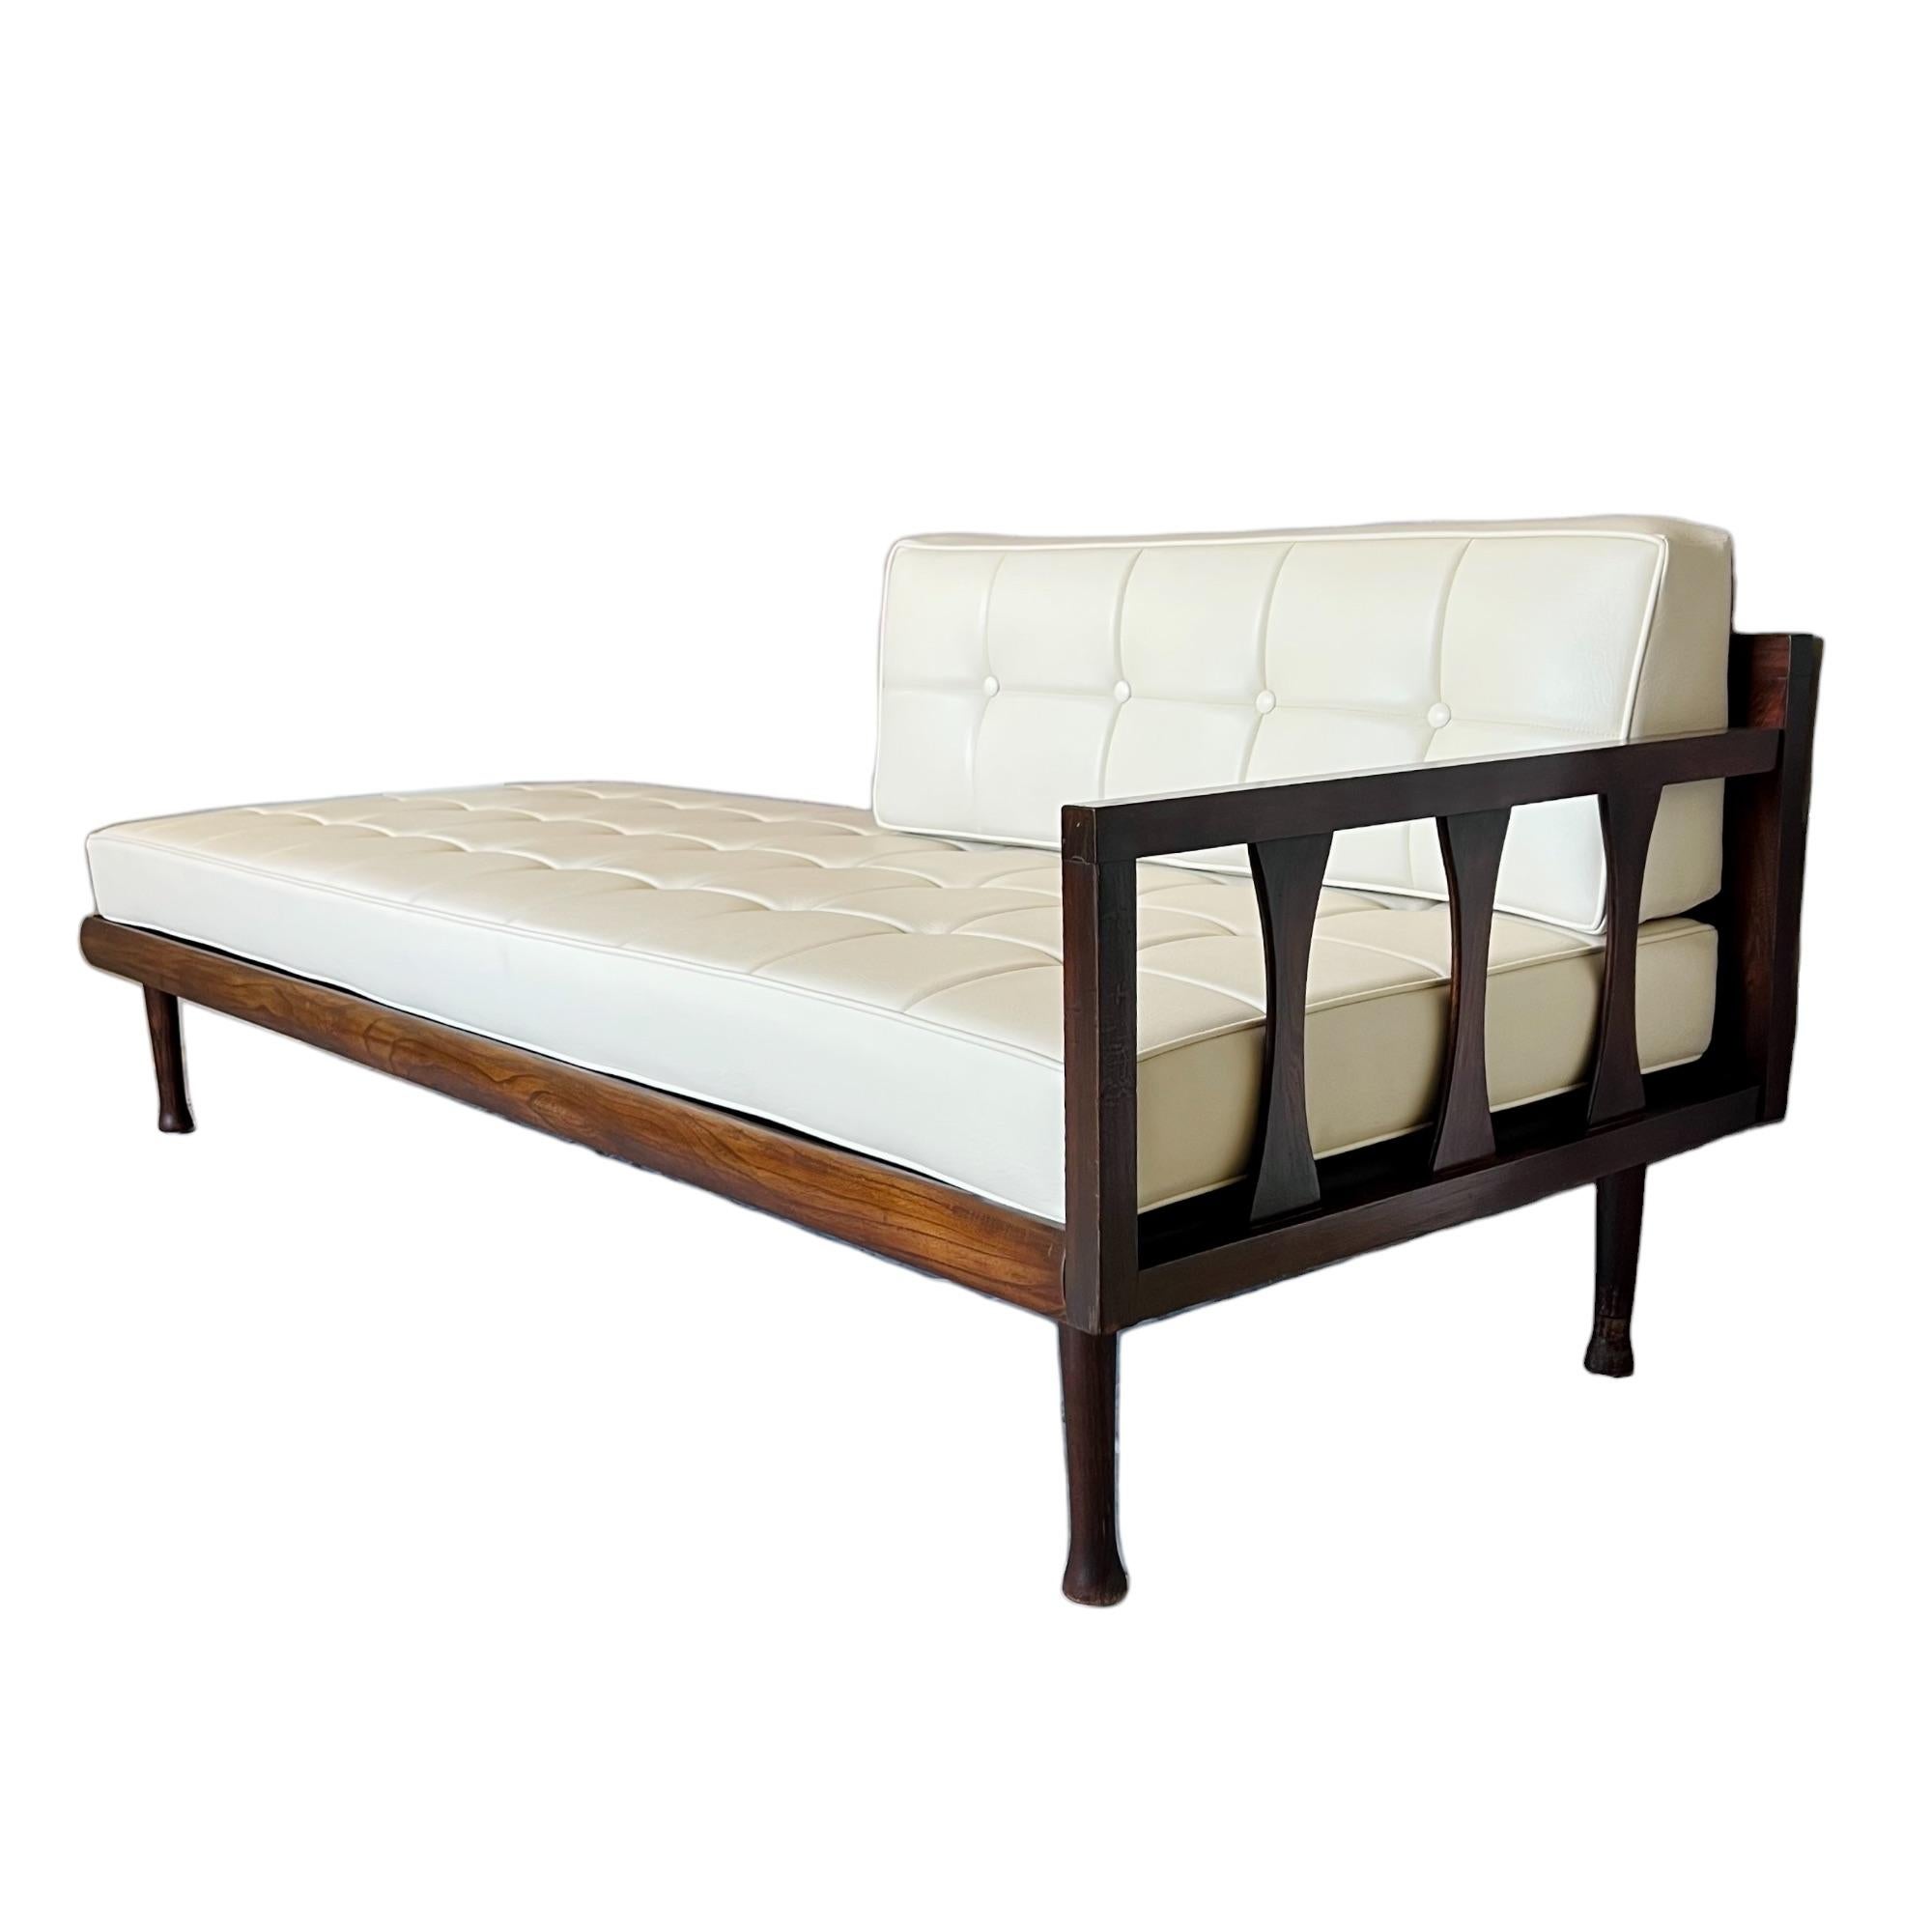 This sleek low profile vintage mid-century modern daybed style lounge sofa flaunts a minimalist design featuring walnut wood framing with a partial back rail and one side arm with vertical bowtie slats. The removable seat and back cushions are newly